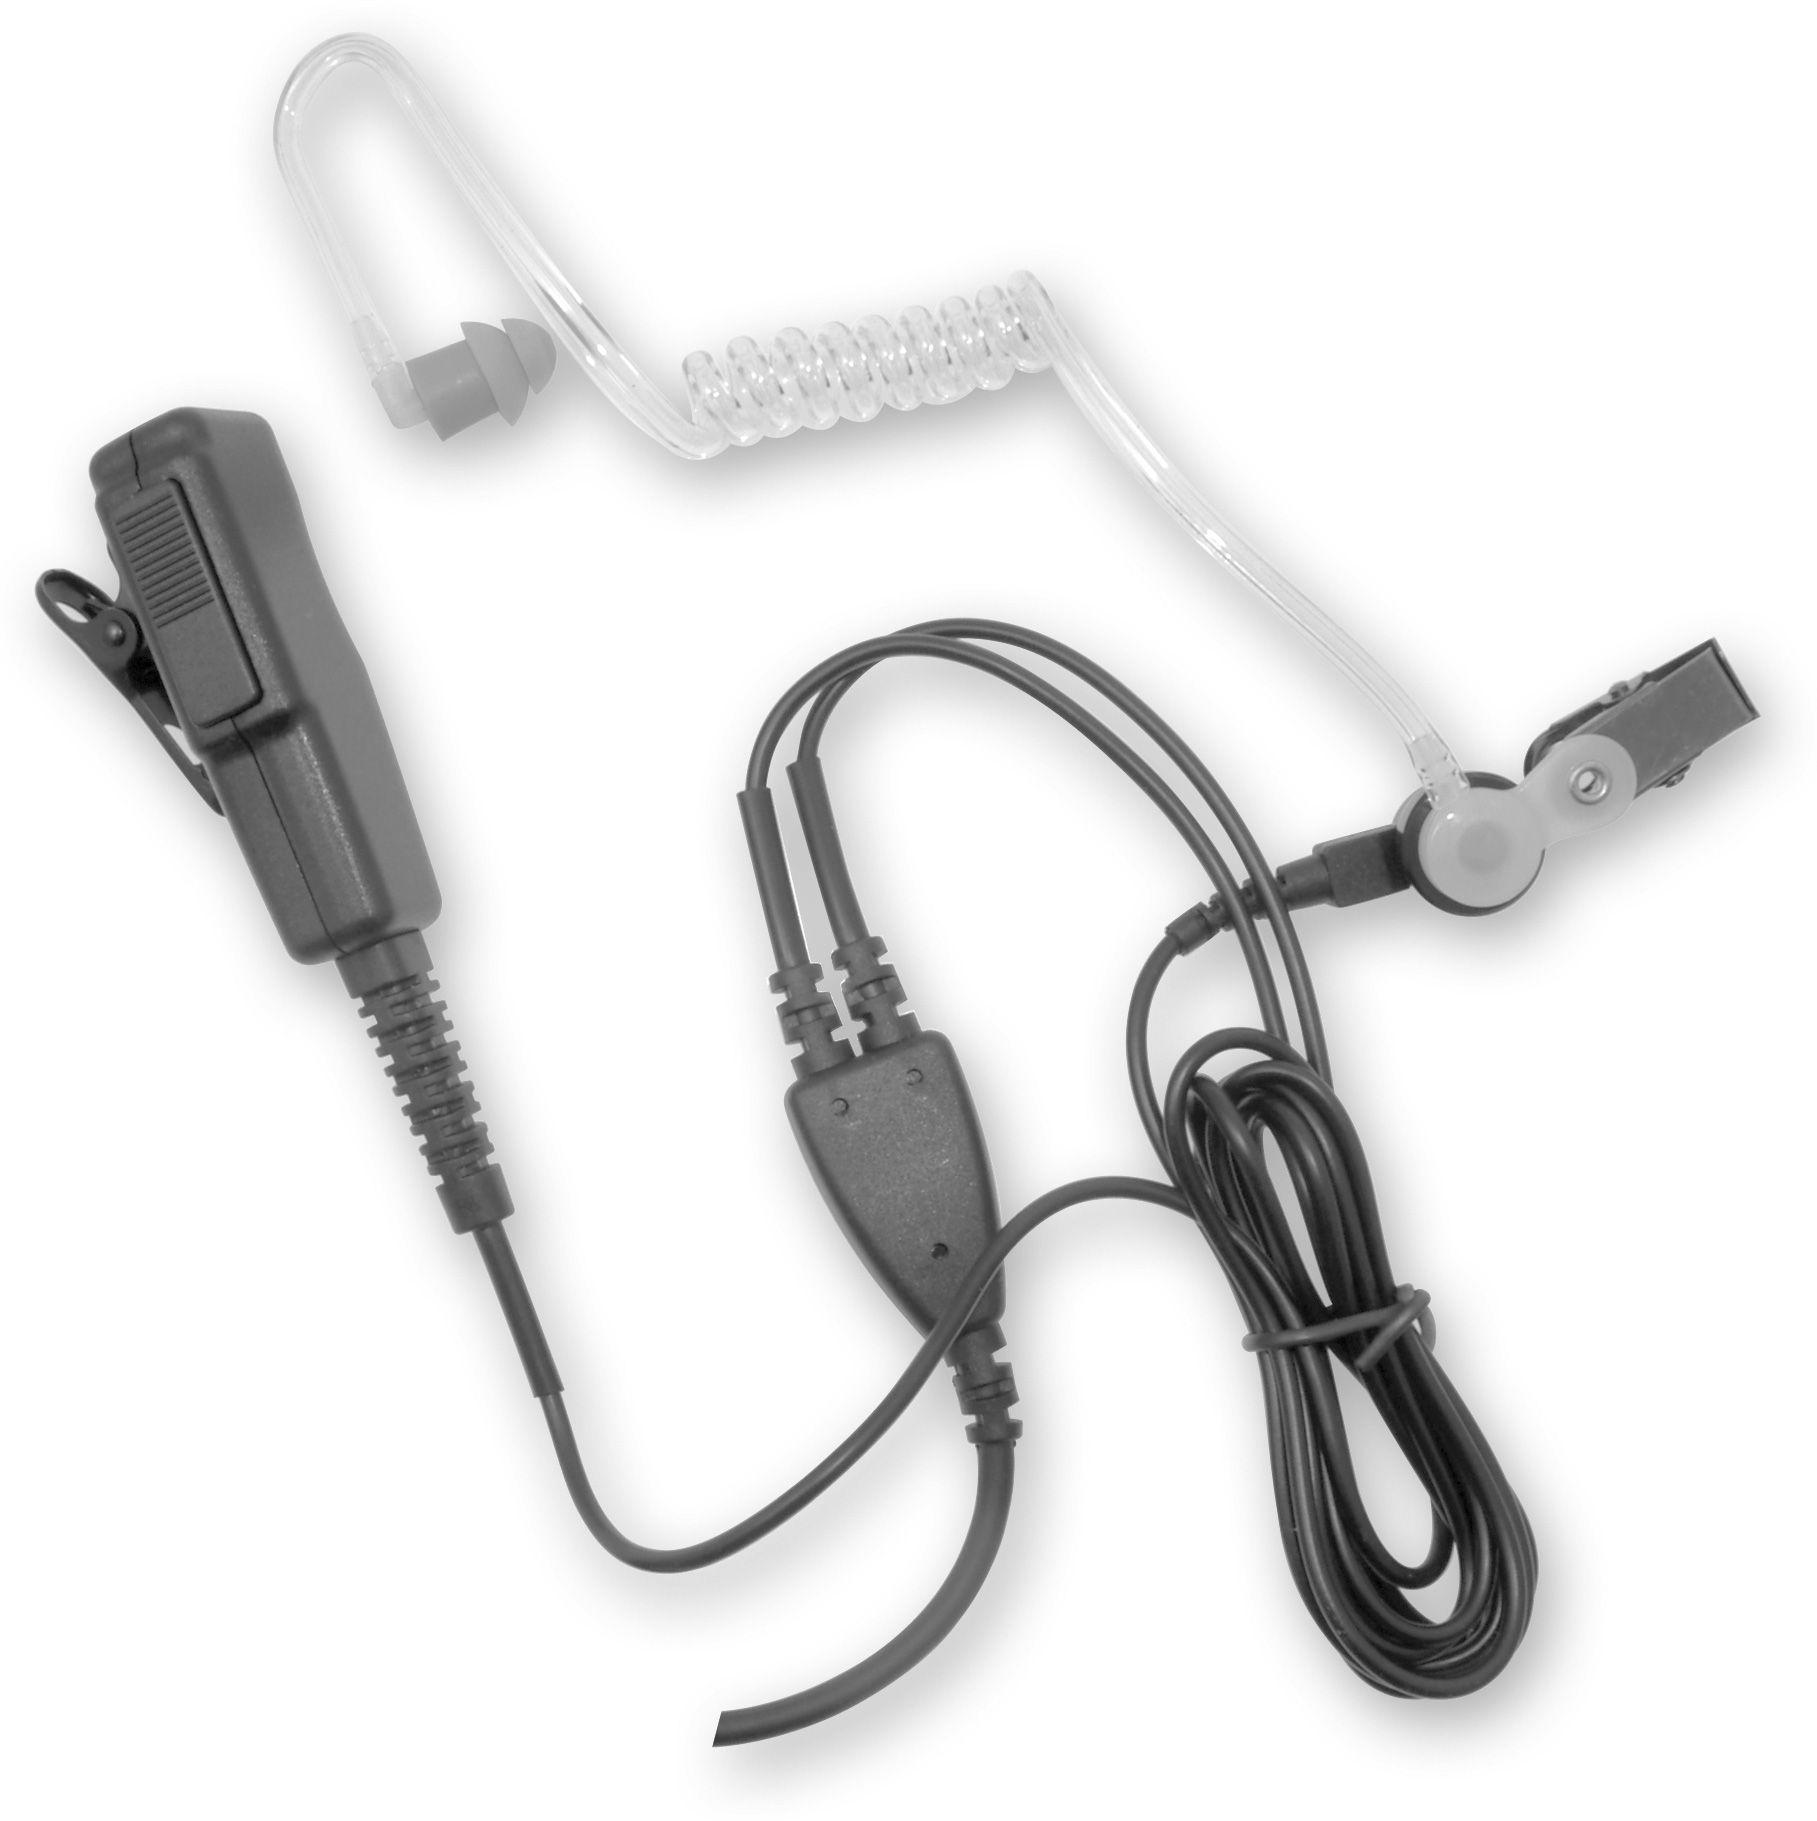 Acoustic curly tube earpiece